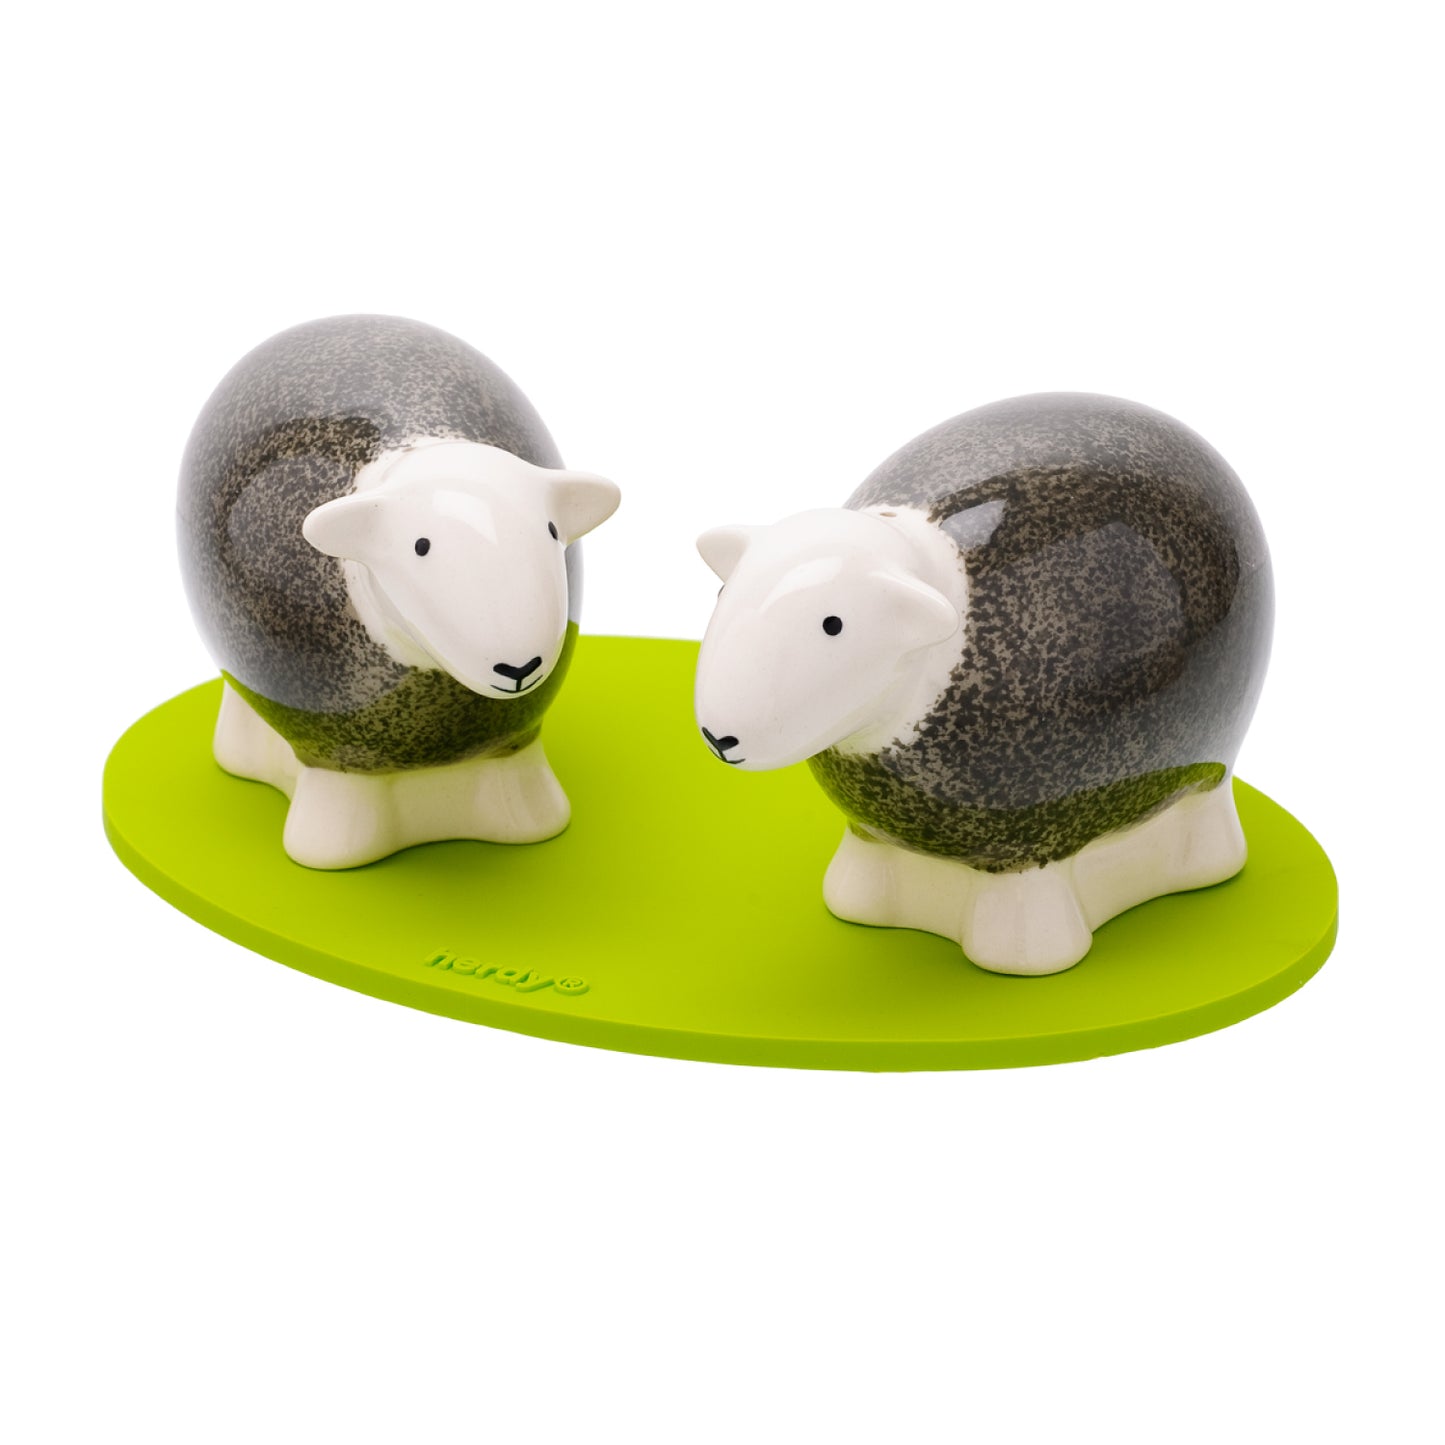 Herdy Salt and Pepper Shakers Grey